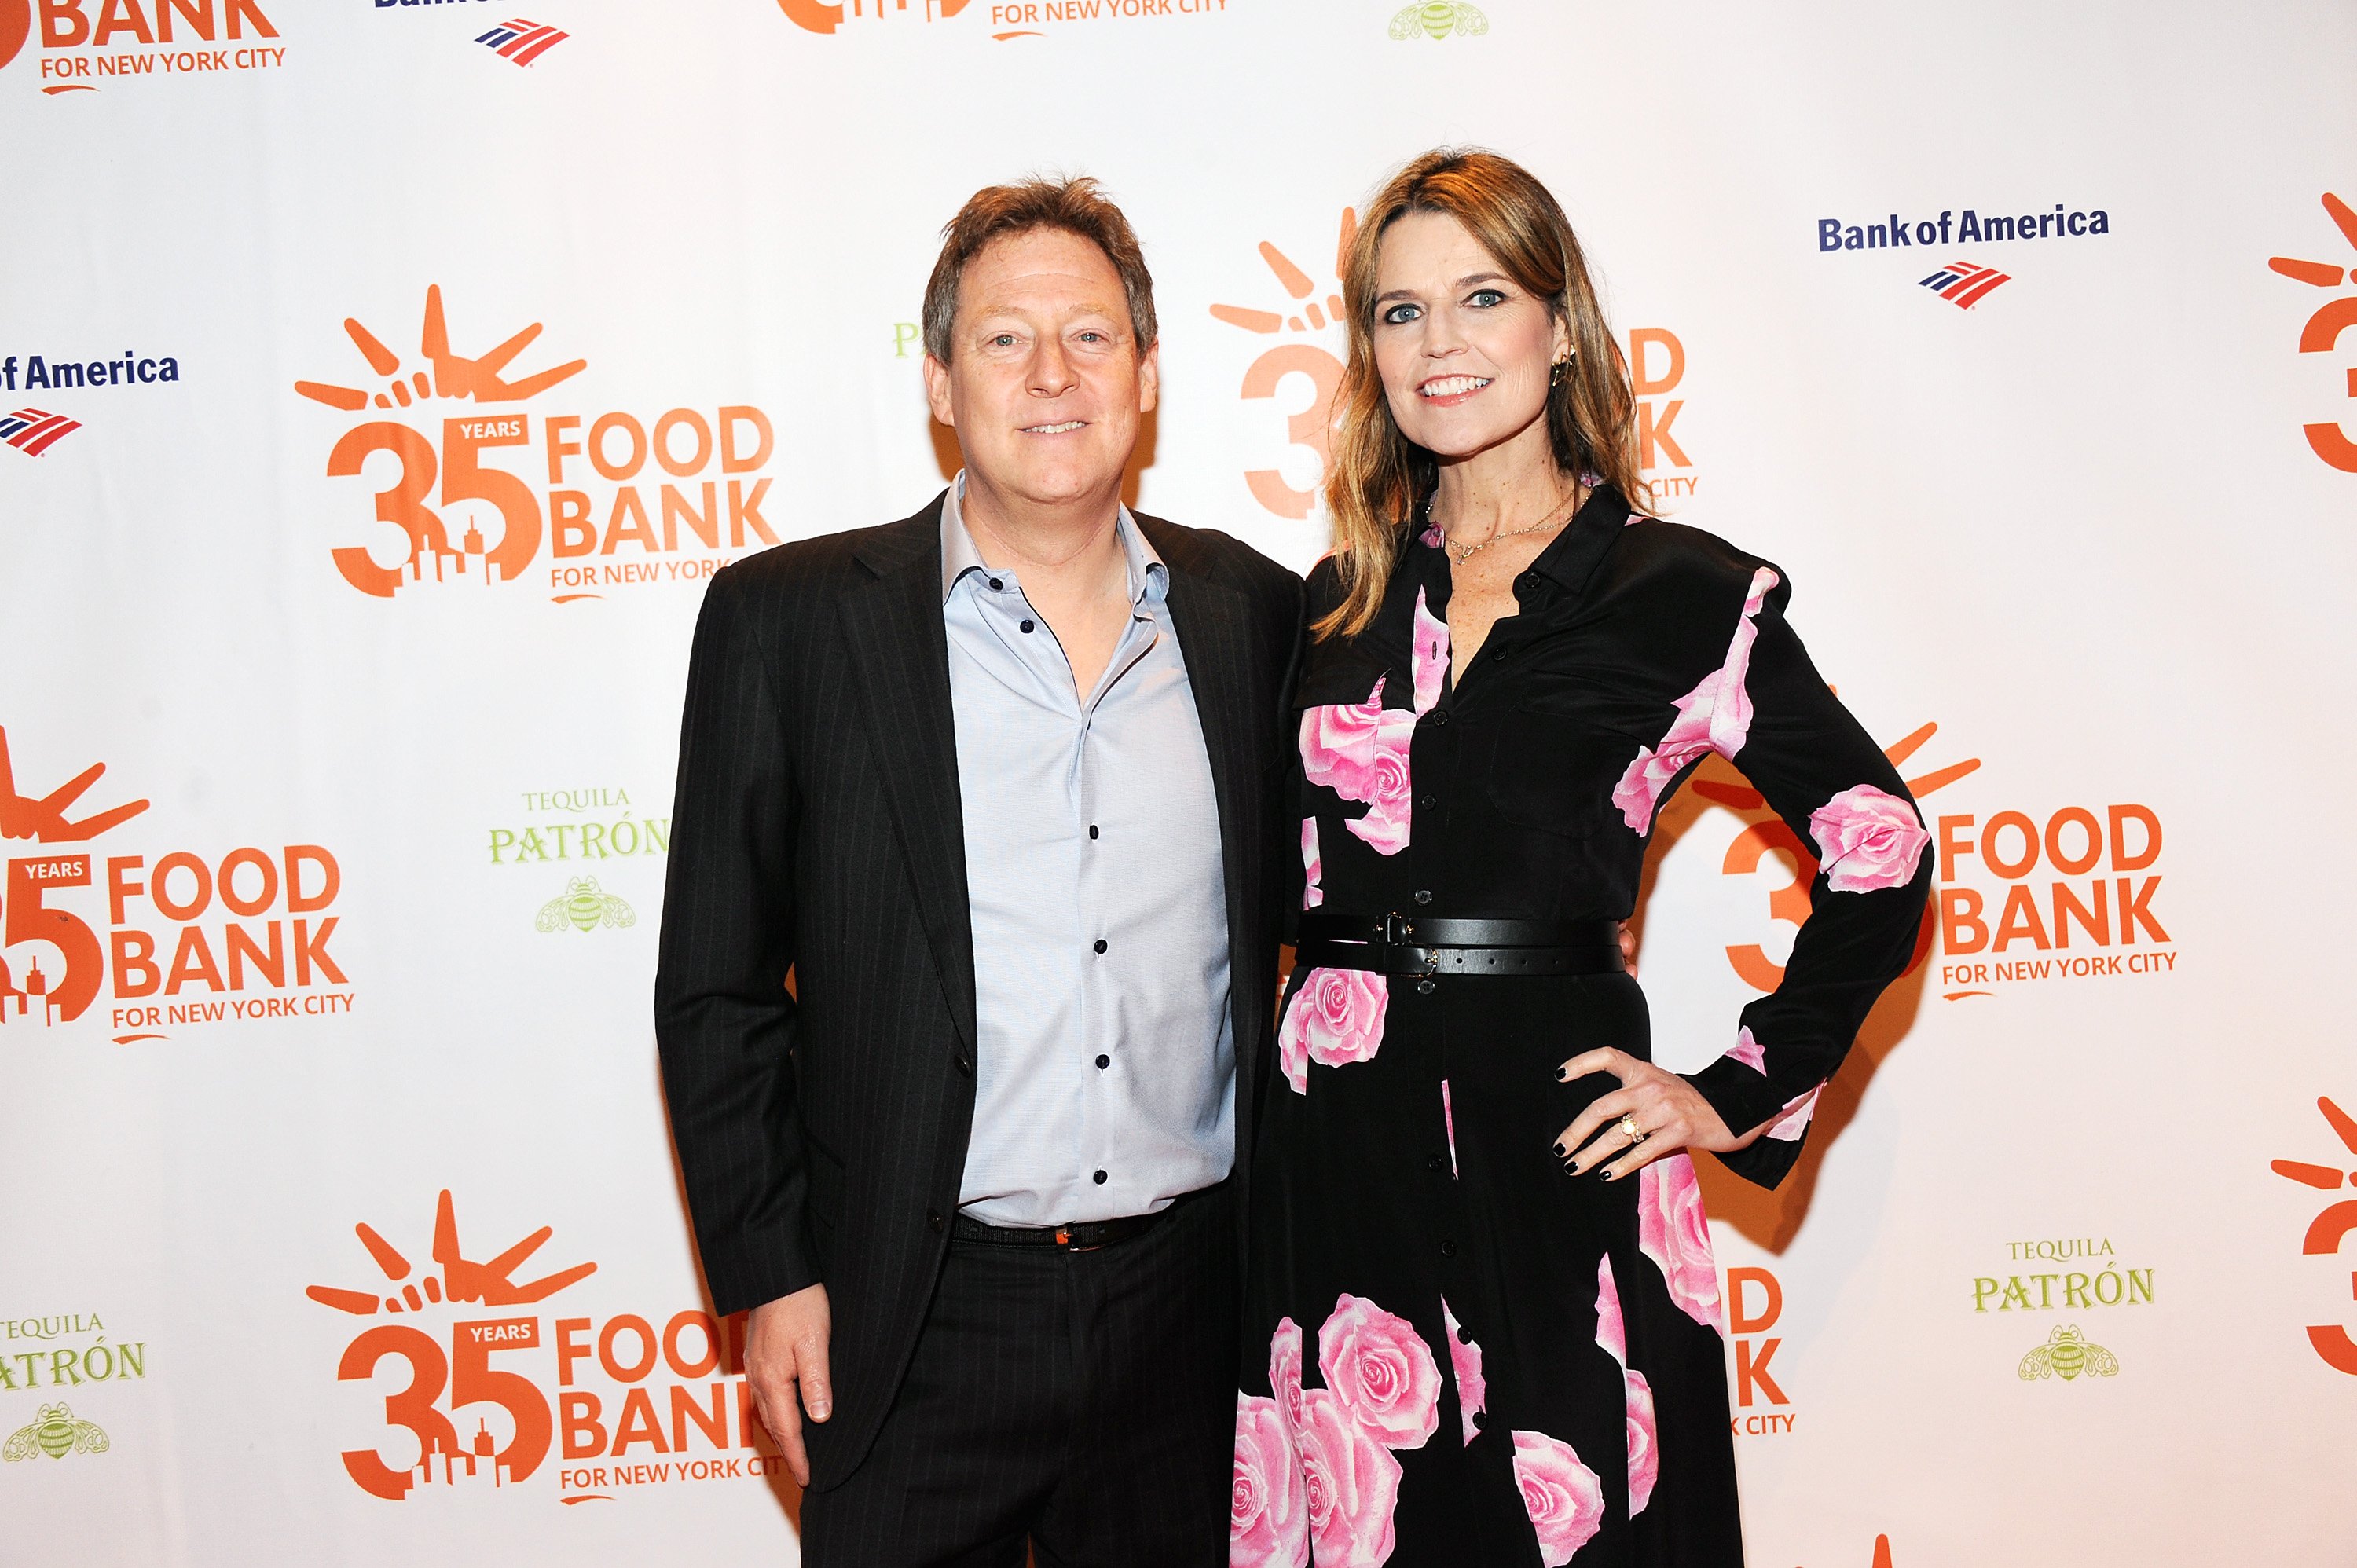 Michael Feldman and Savannah Guthrie attend the 2018 Food Bank For New York City's Can Do Awards Dinner at Cipriani Wall Street on April 17, 2018 in New York City. | Source: Getty Images